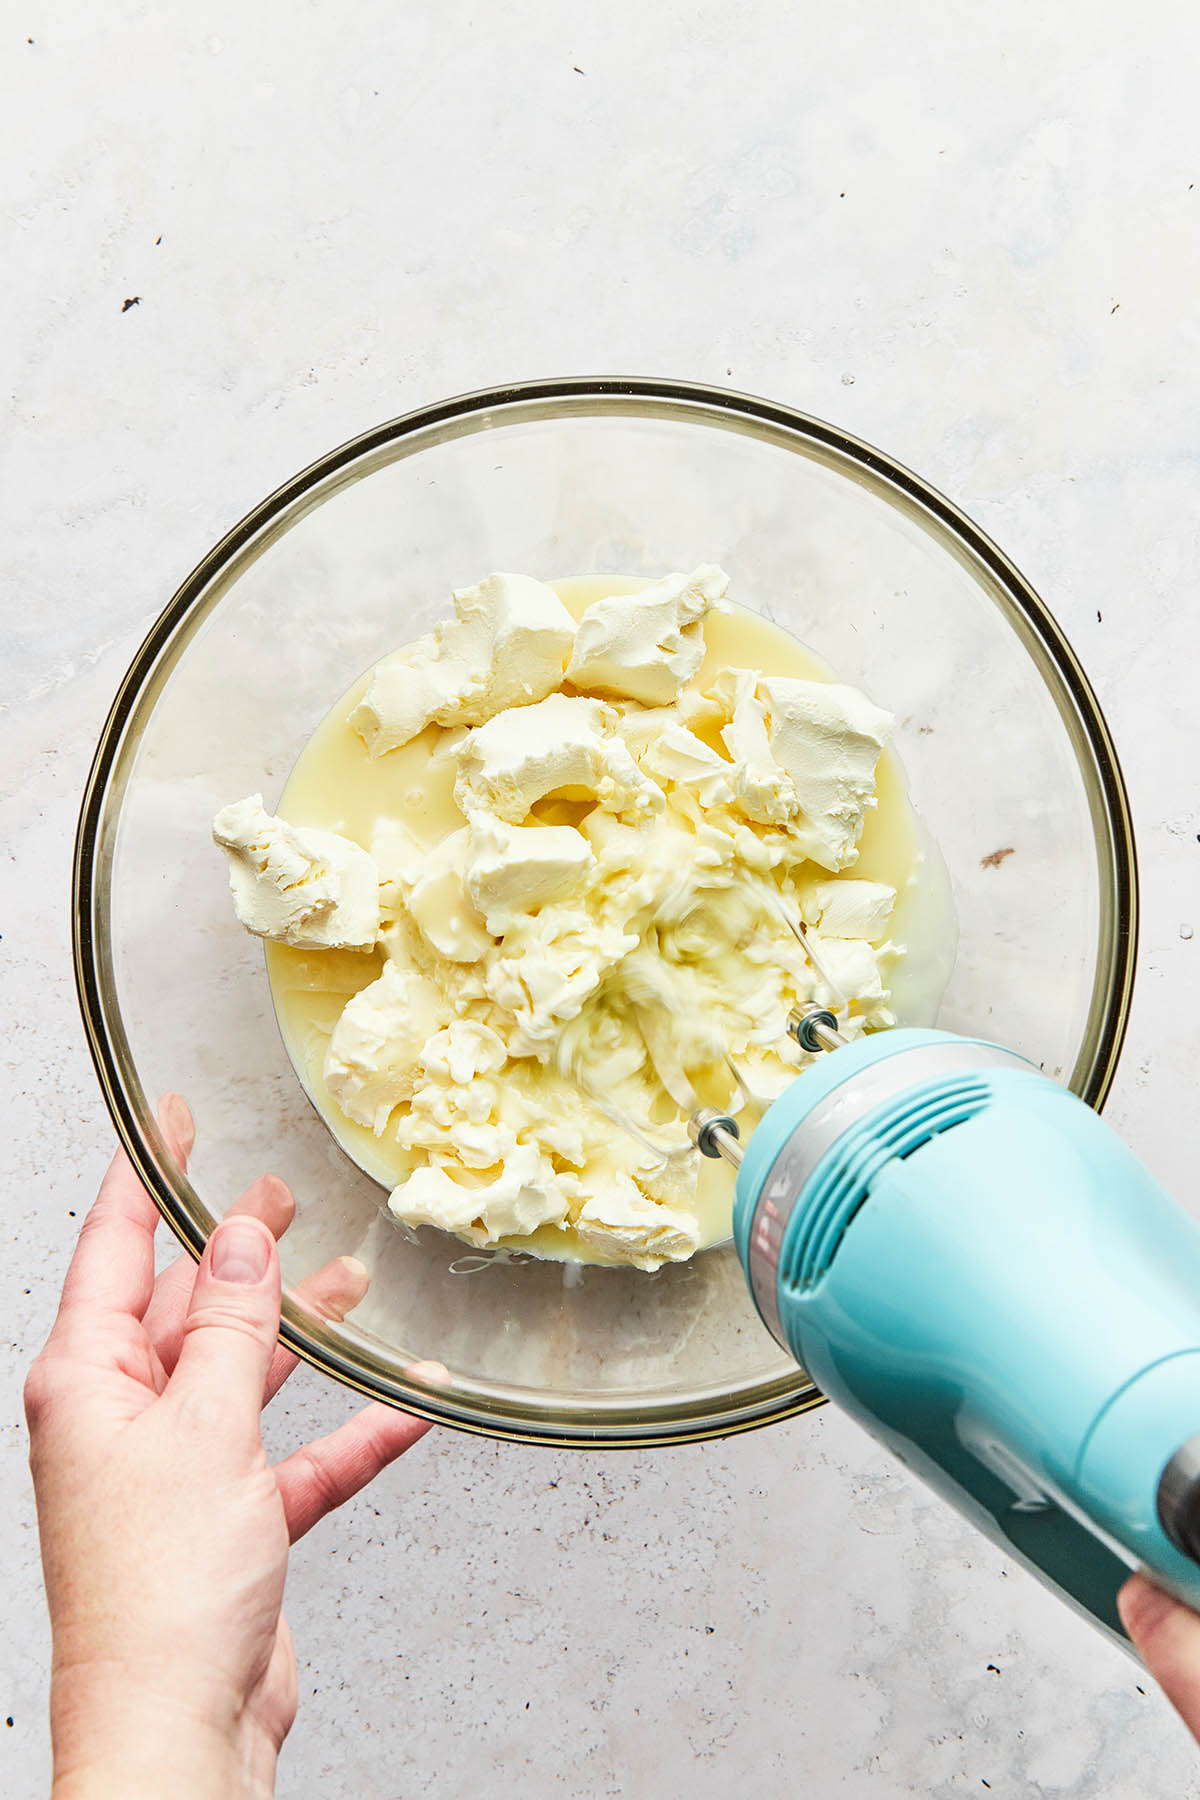 A hand using a handheld mixer to beat cream cheese and sweetened condensed milk in a bowl.